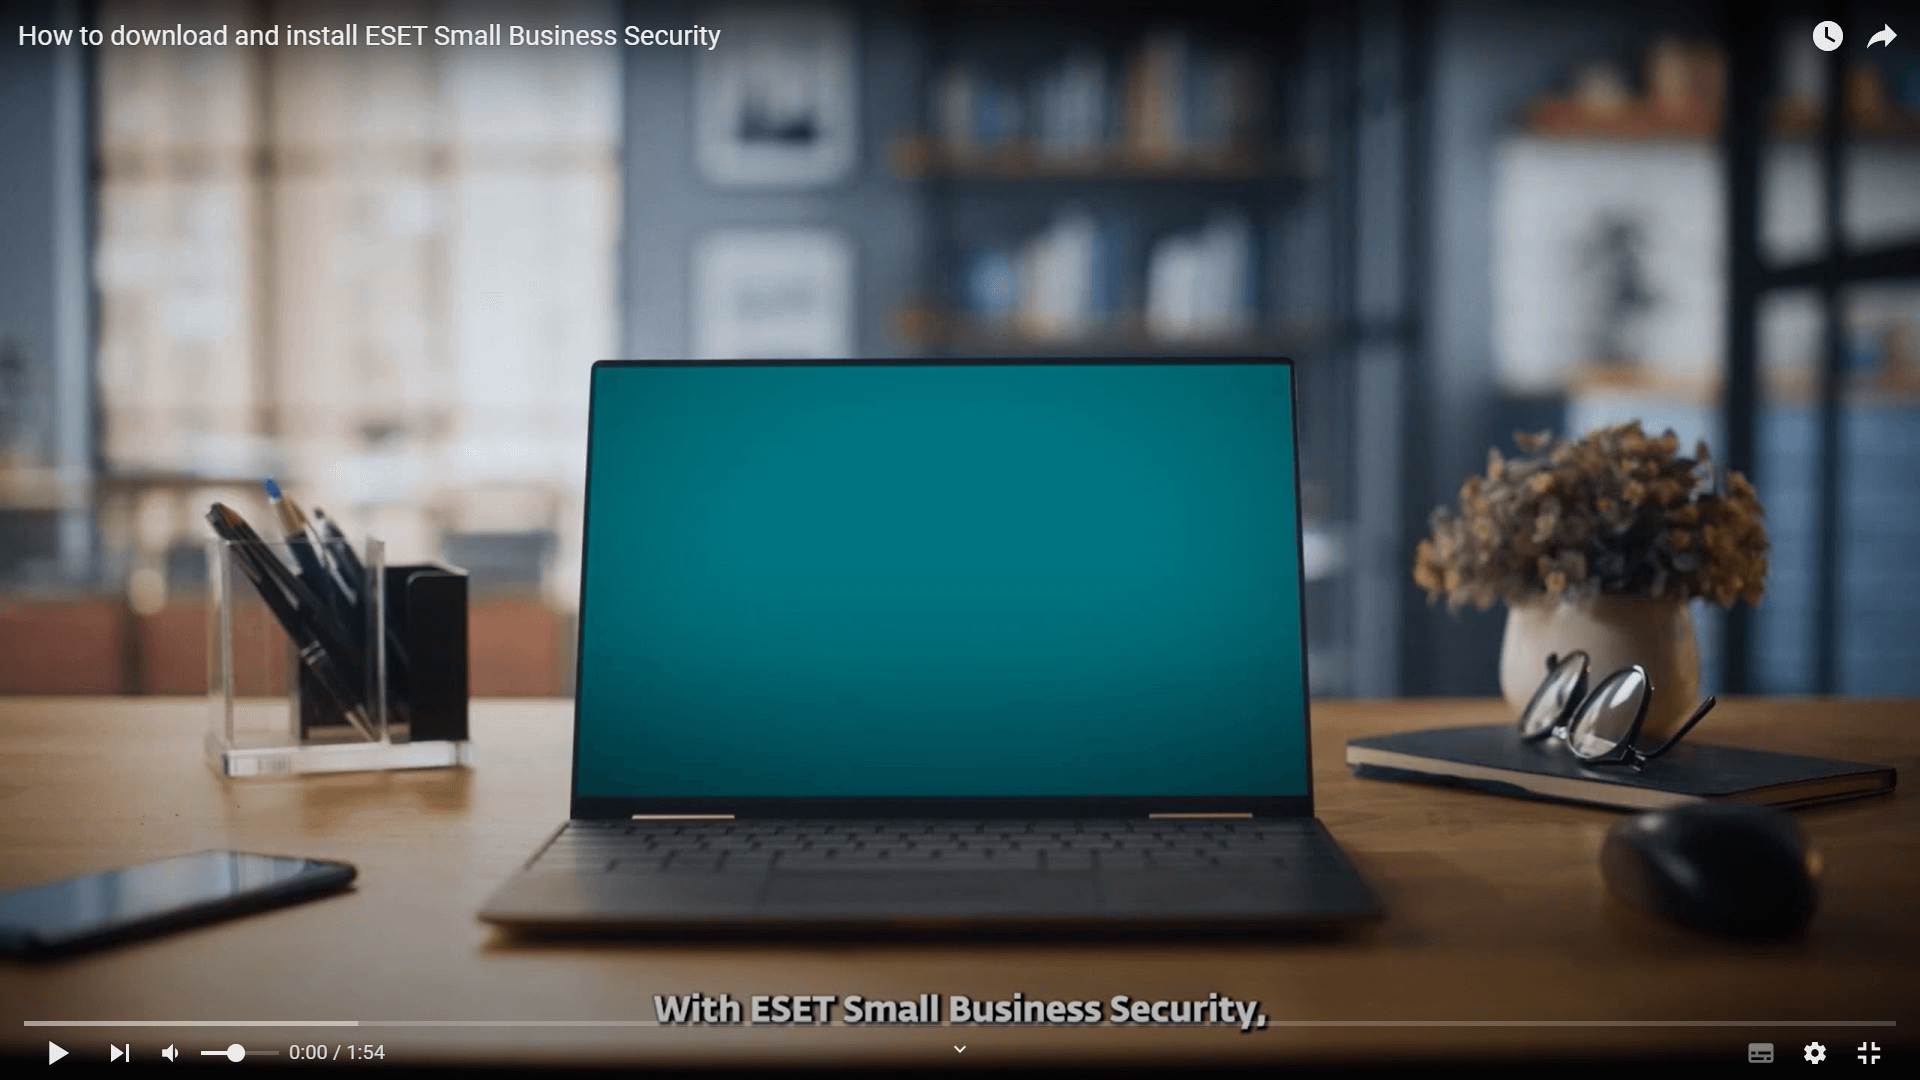 ESET Small Business Security video